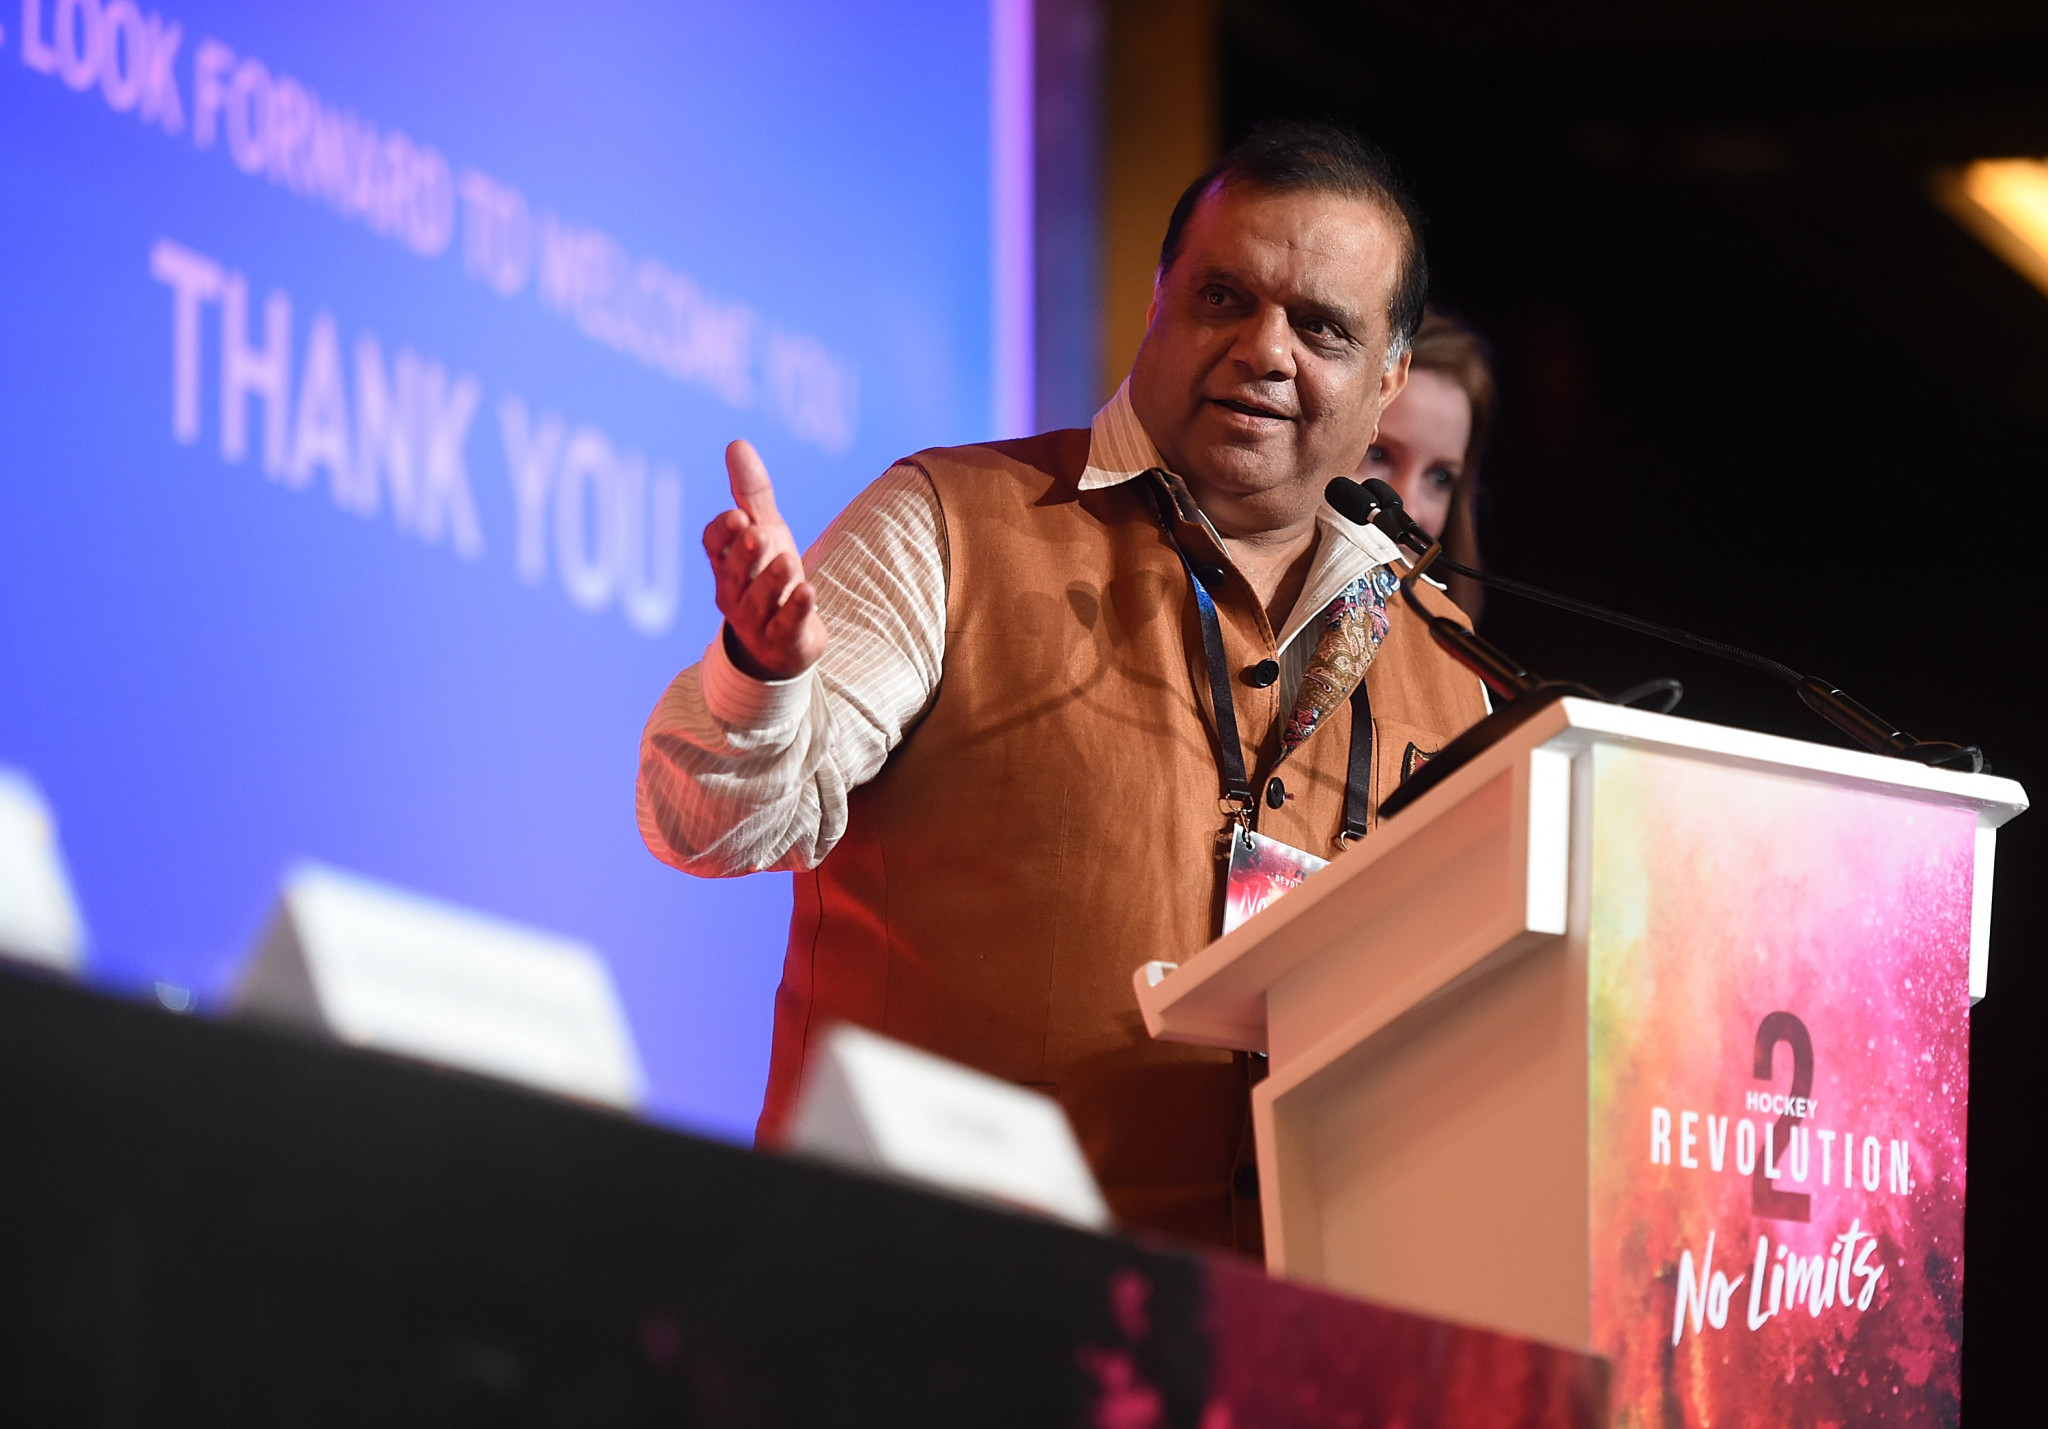 FIH President Narinder Batra wants hockey5s to appear on the Olympic programme alongside traditional field hockey ©Getty Images